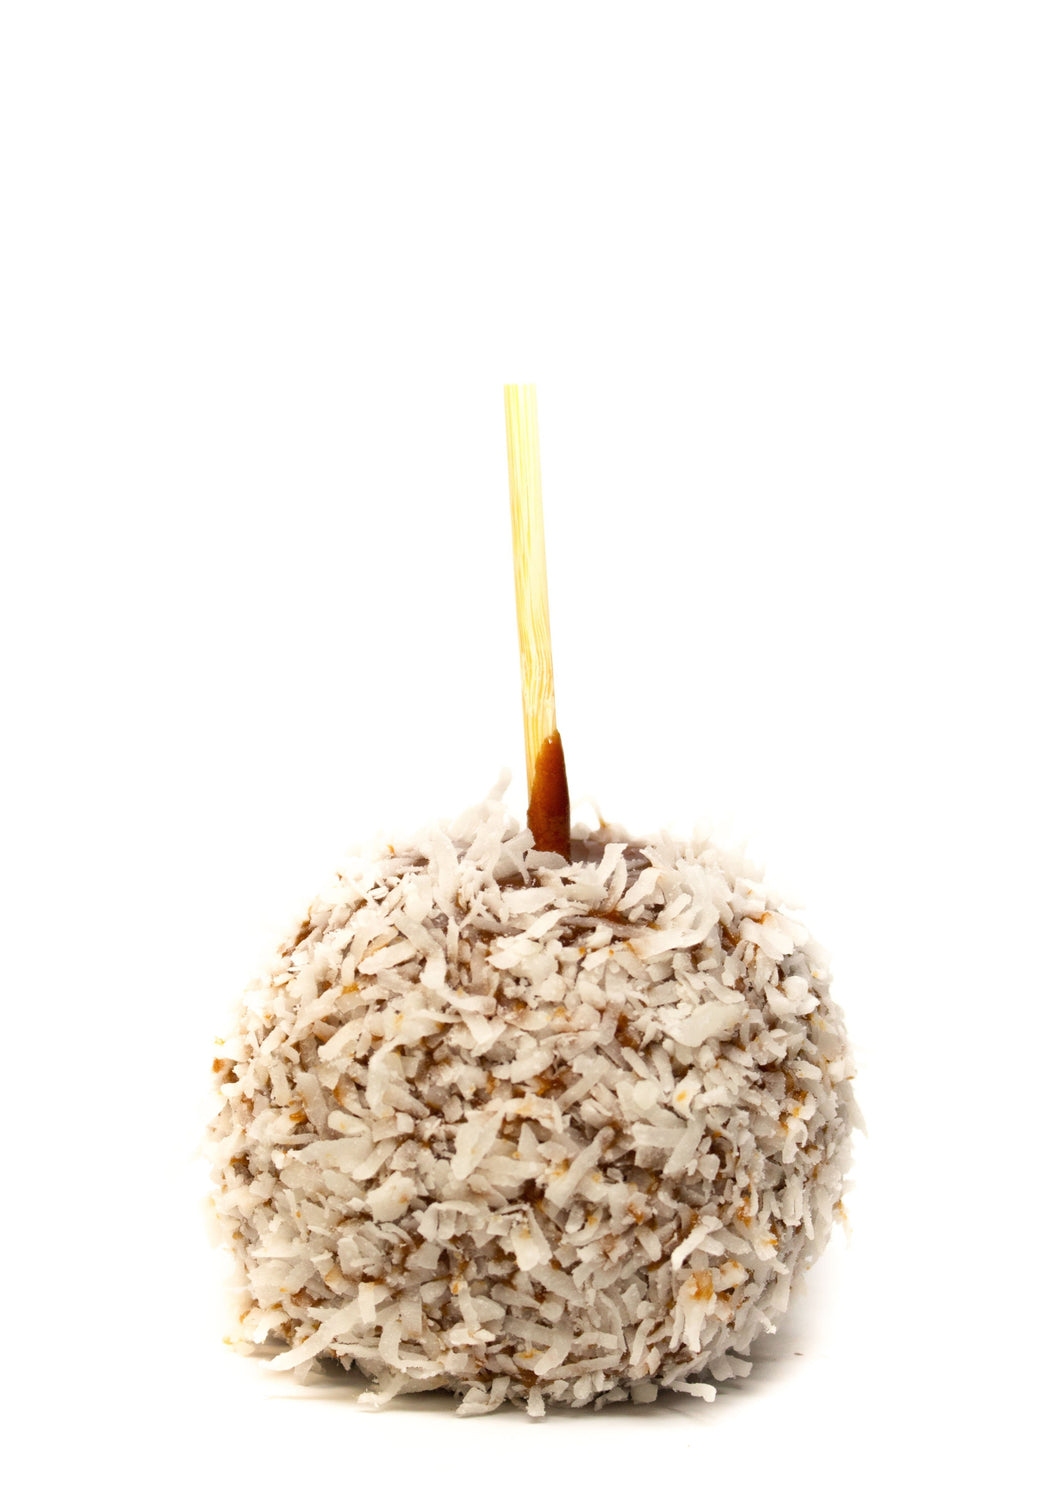 Hand Dipped Caramel Apple Rolled in Shredded Coconut